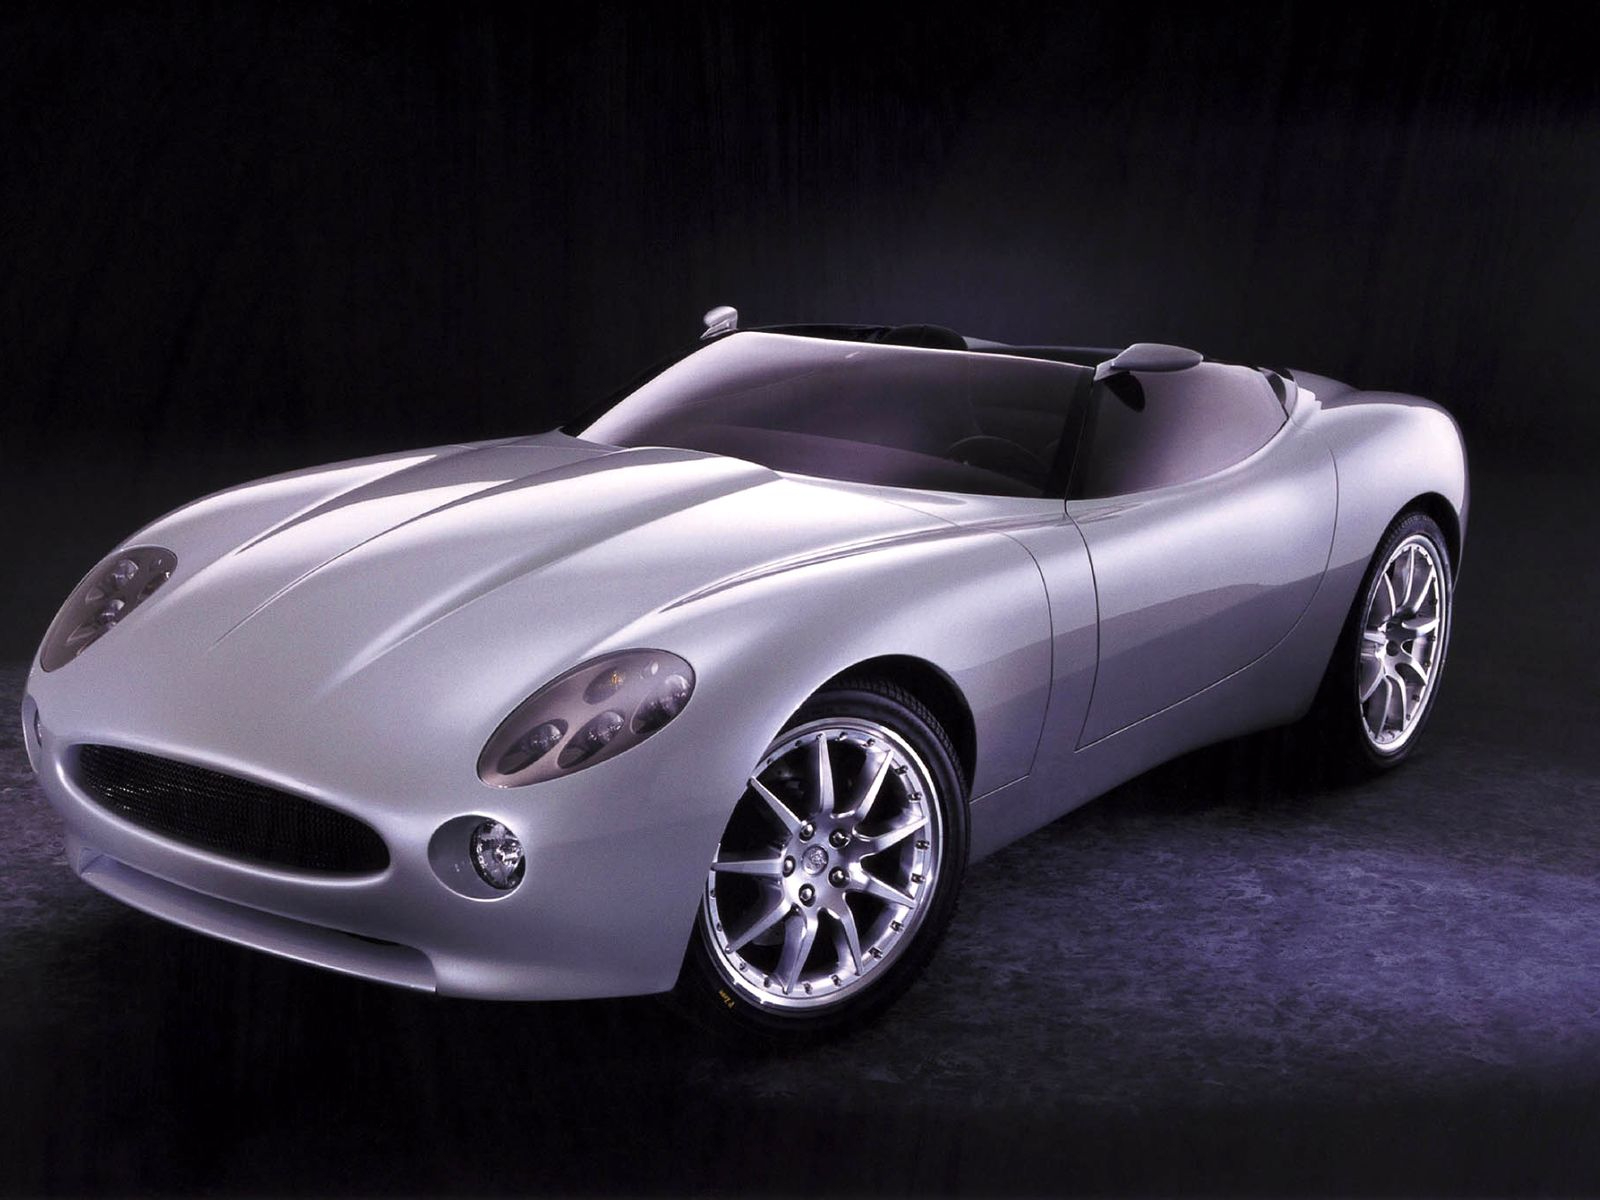 Concept Cars That Never Made The Cut: Jaguar F-Type X600